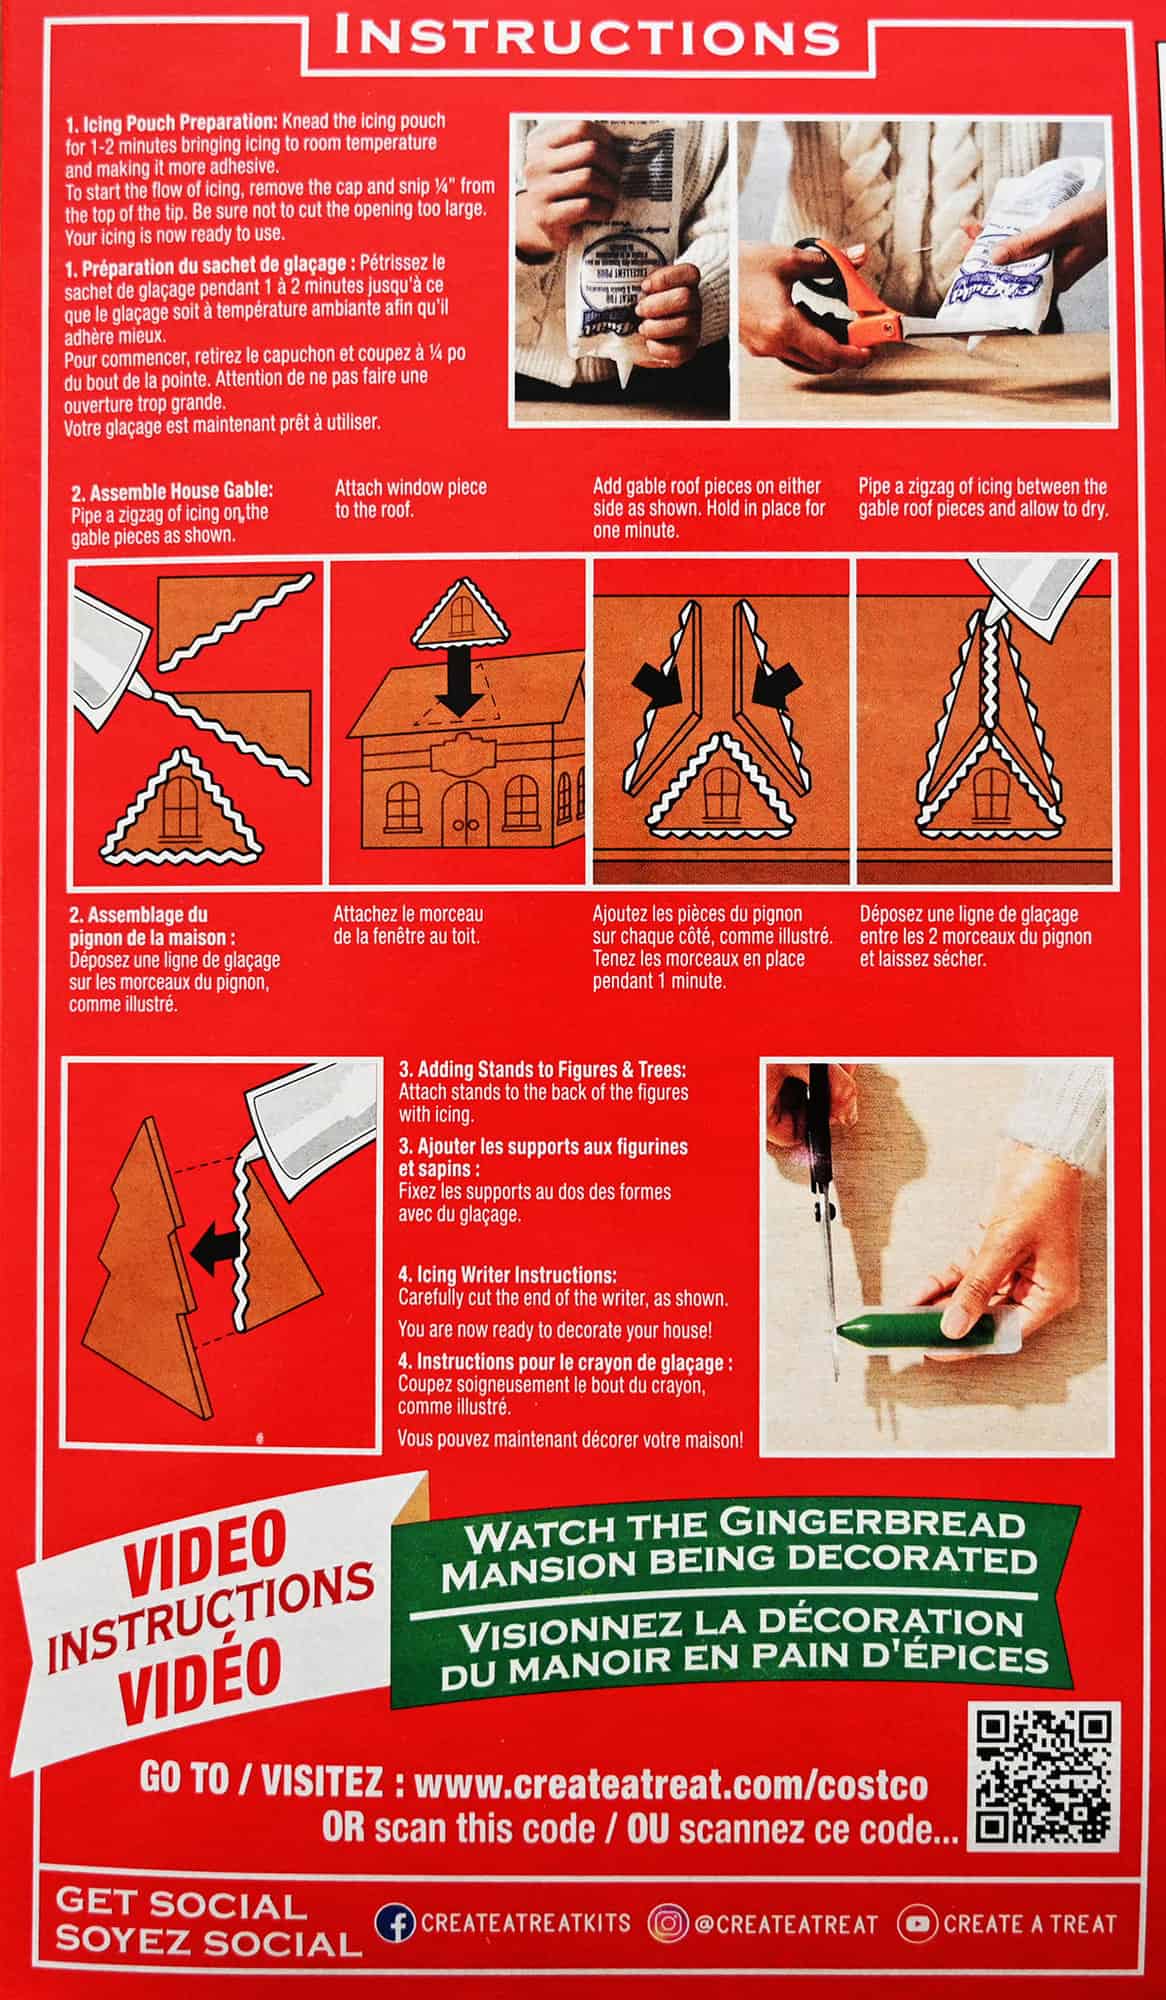 Image of the decorating instructions for the gingerbread mansion from the back of the box.